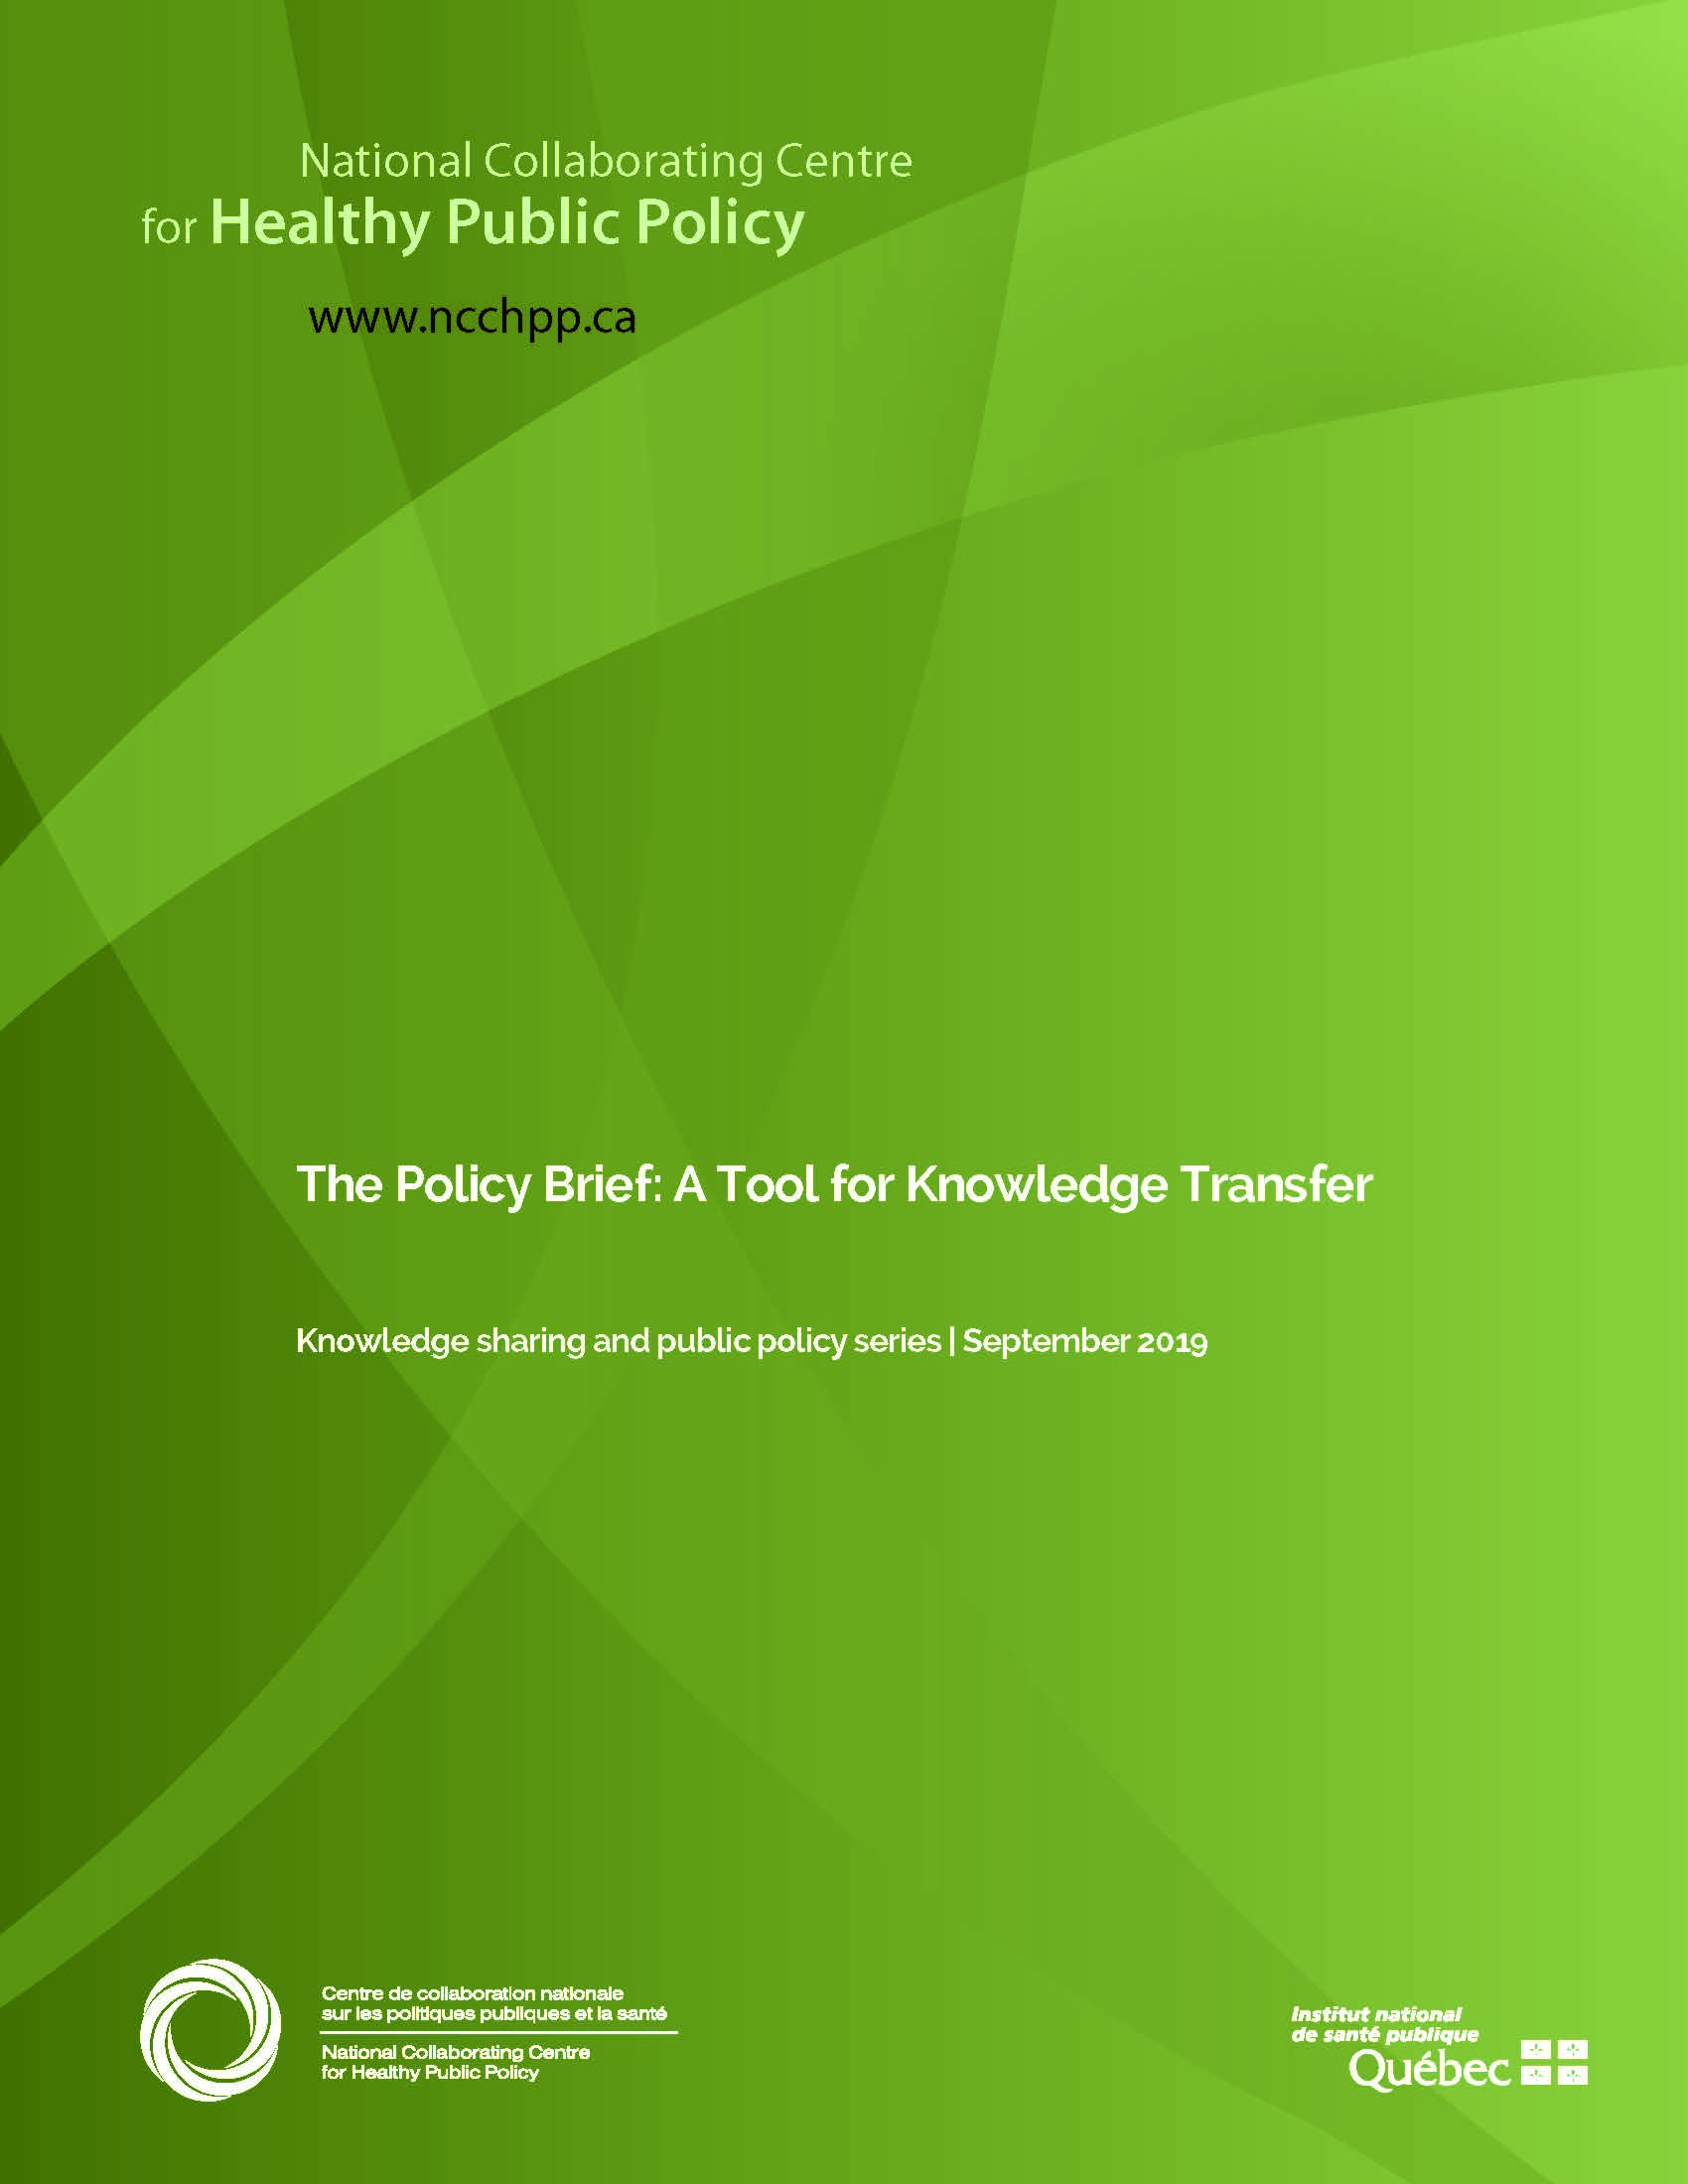 The Policy Brief: A Tool for Knowledge Transfer